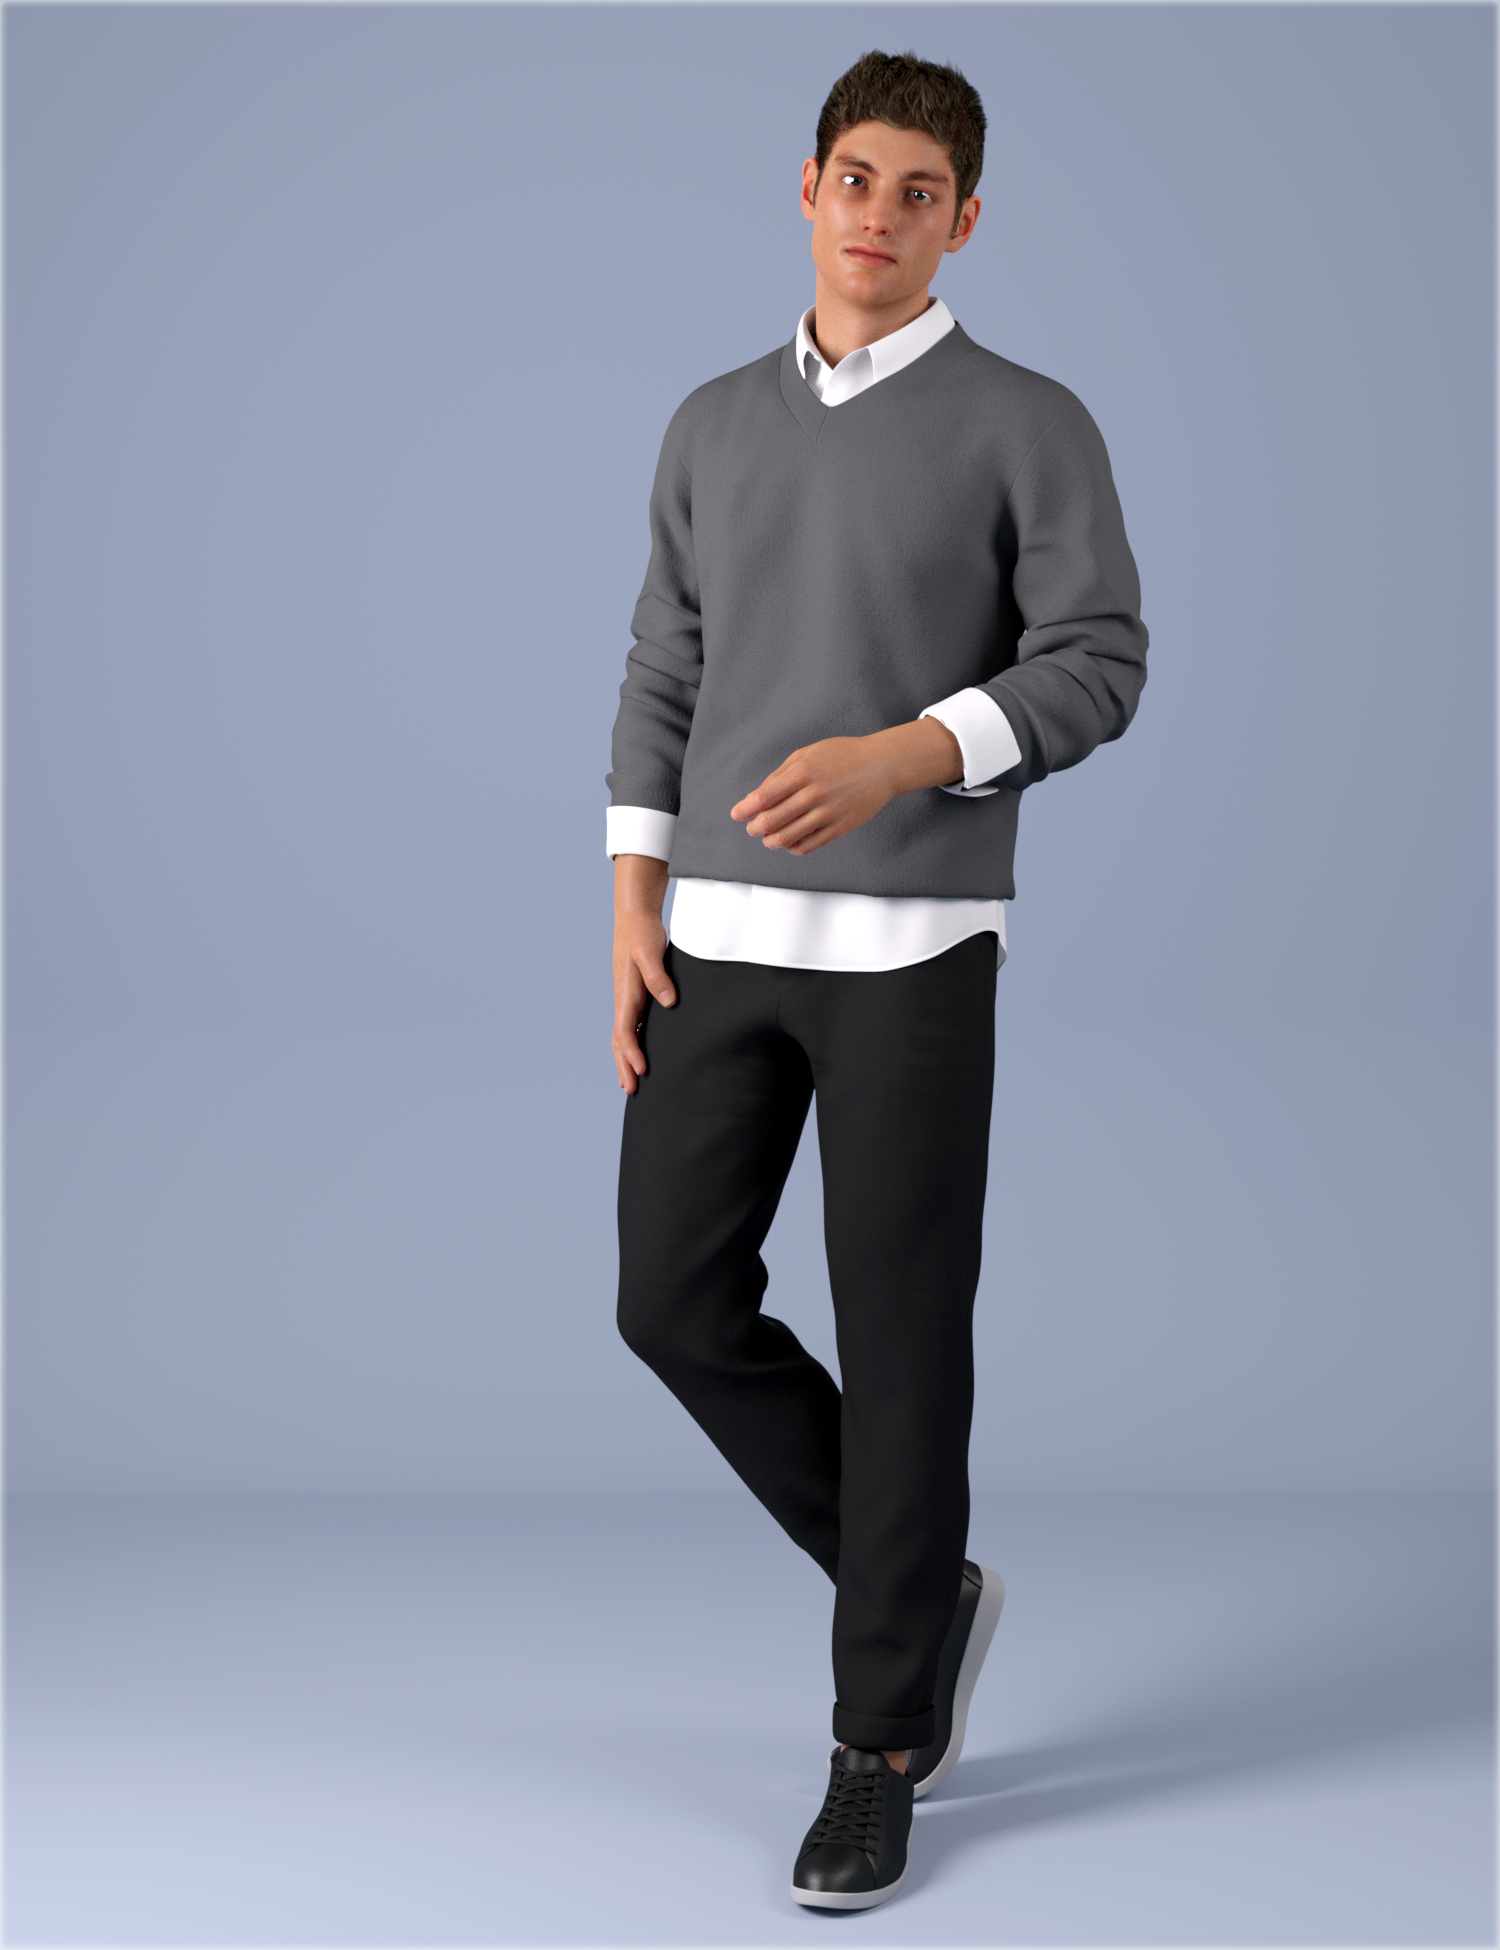 dForce HnC V-Neck Knit Outfits for Genesis 8.1 Males by: IH Kang, 3D Models by Daz 3D